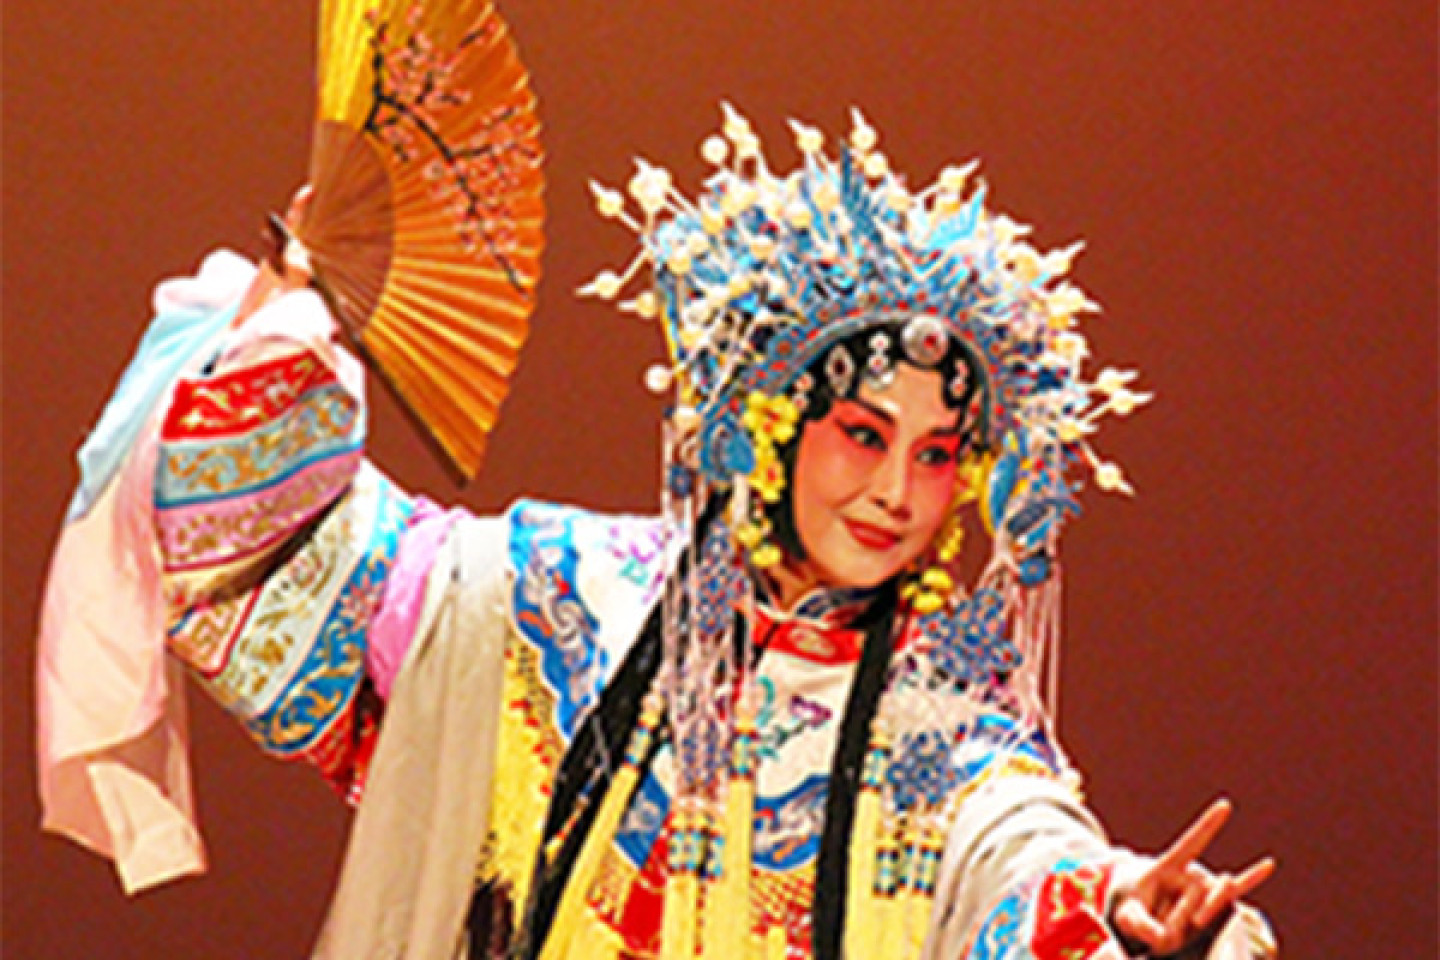 A Peking Opera dancer dressed in a colorful outfit holding a yellow fan.